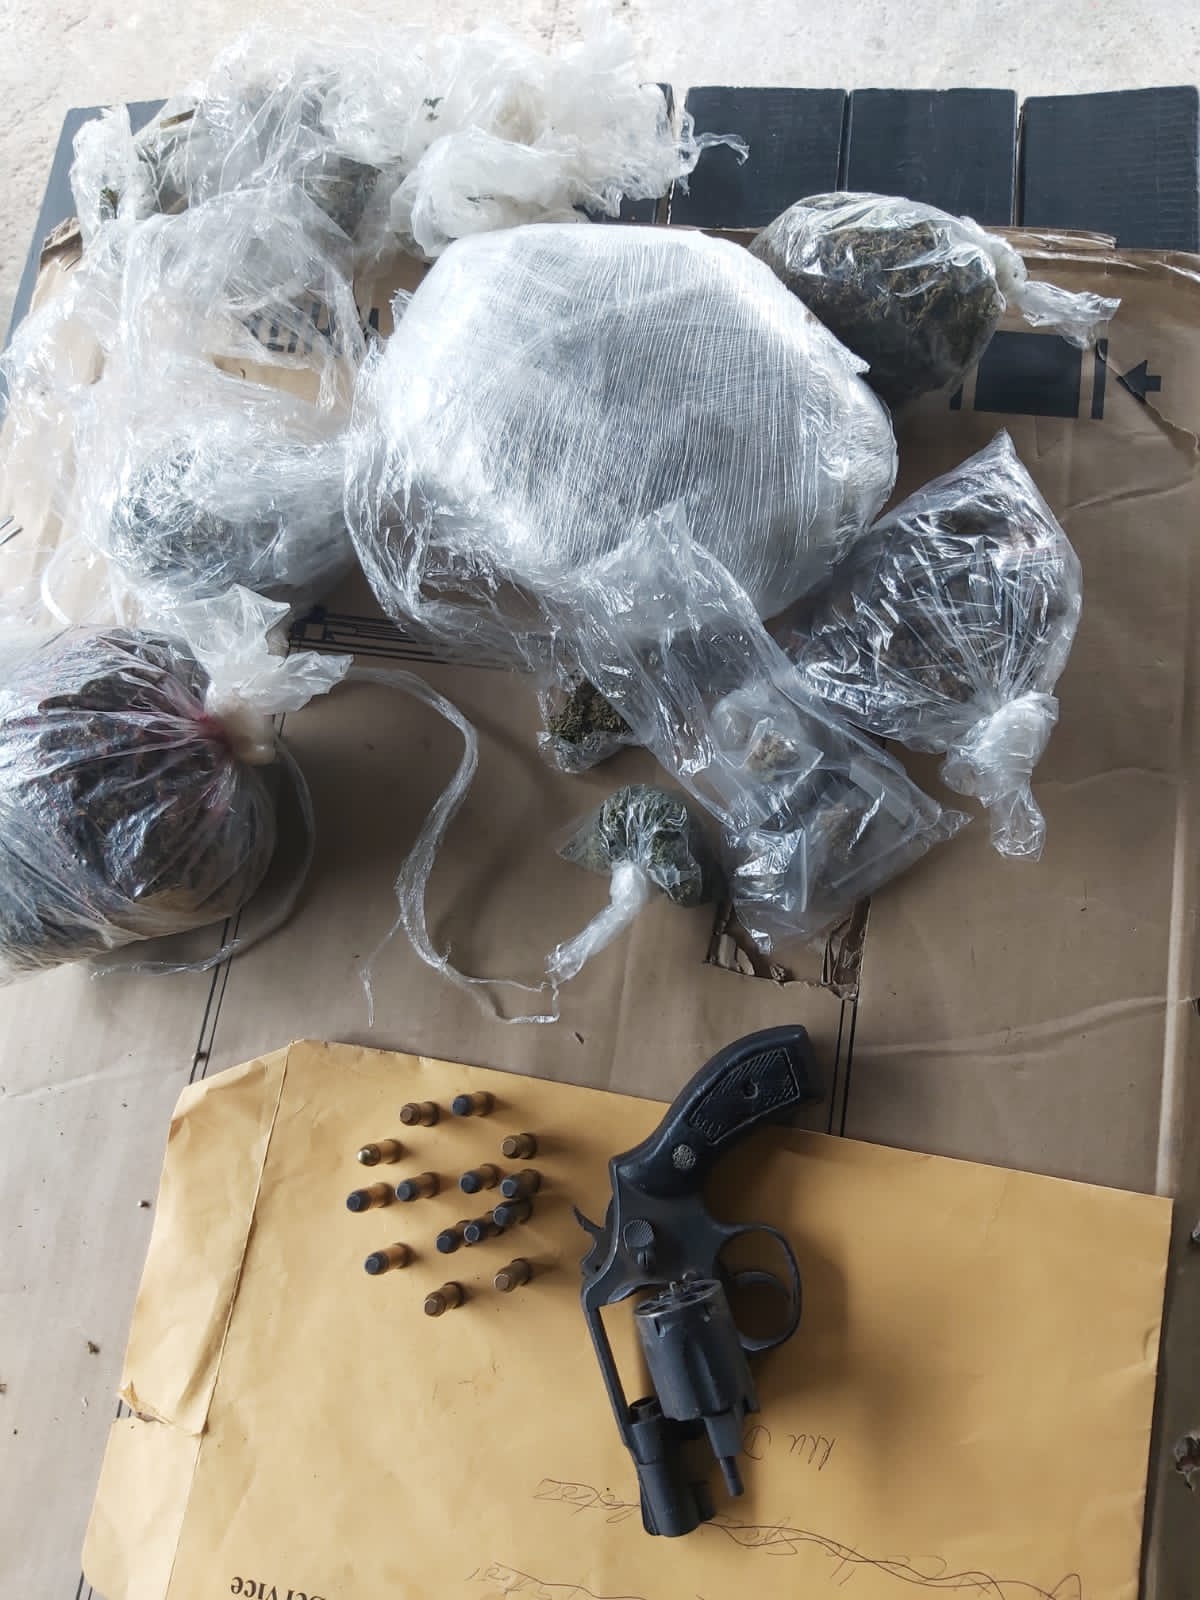 Police Seized Firearm Ammunition And Drugs During Raid Asberth News Network